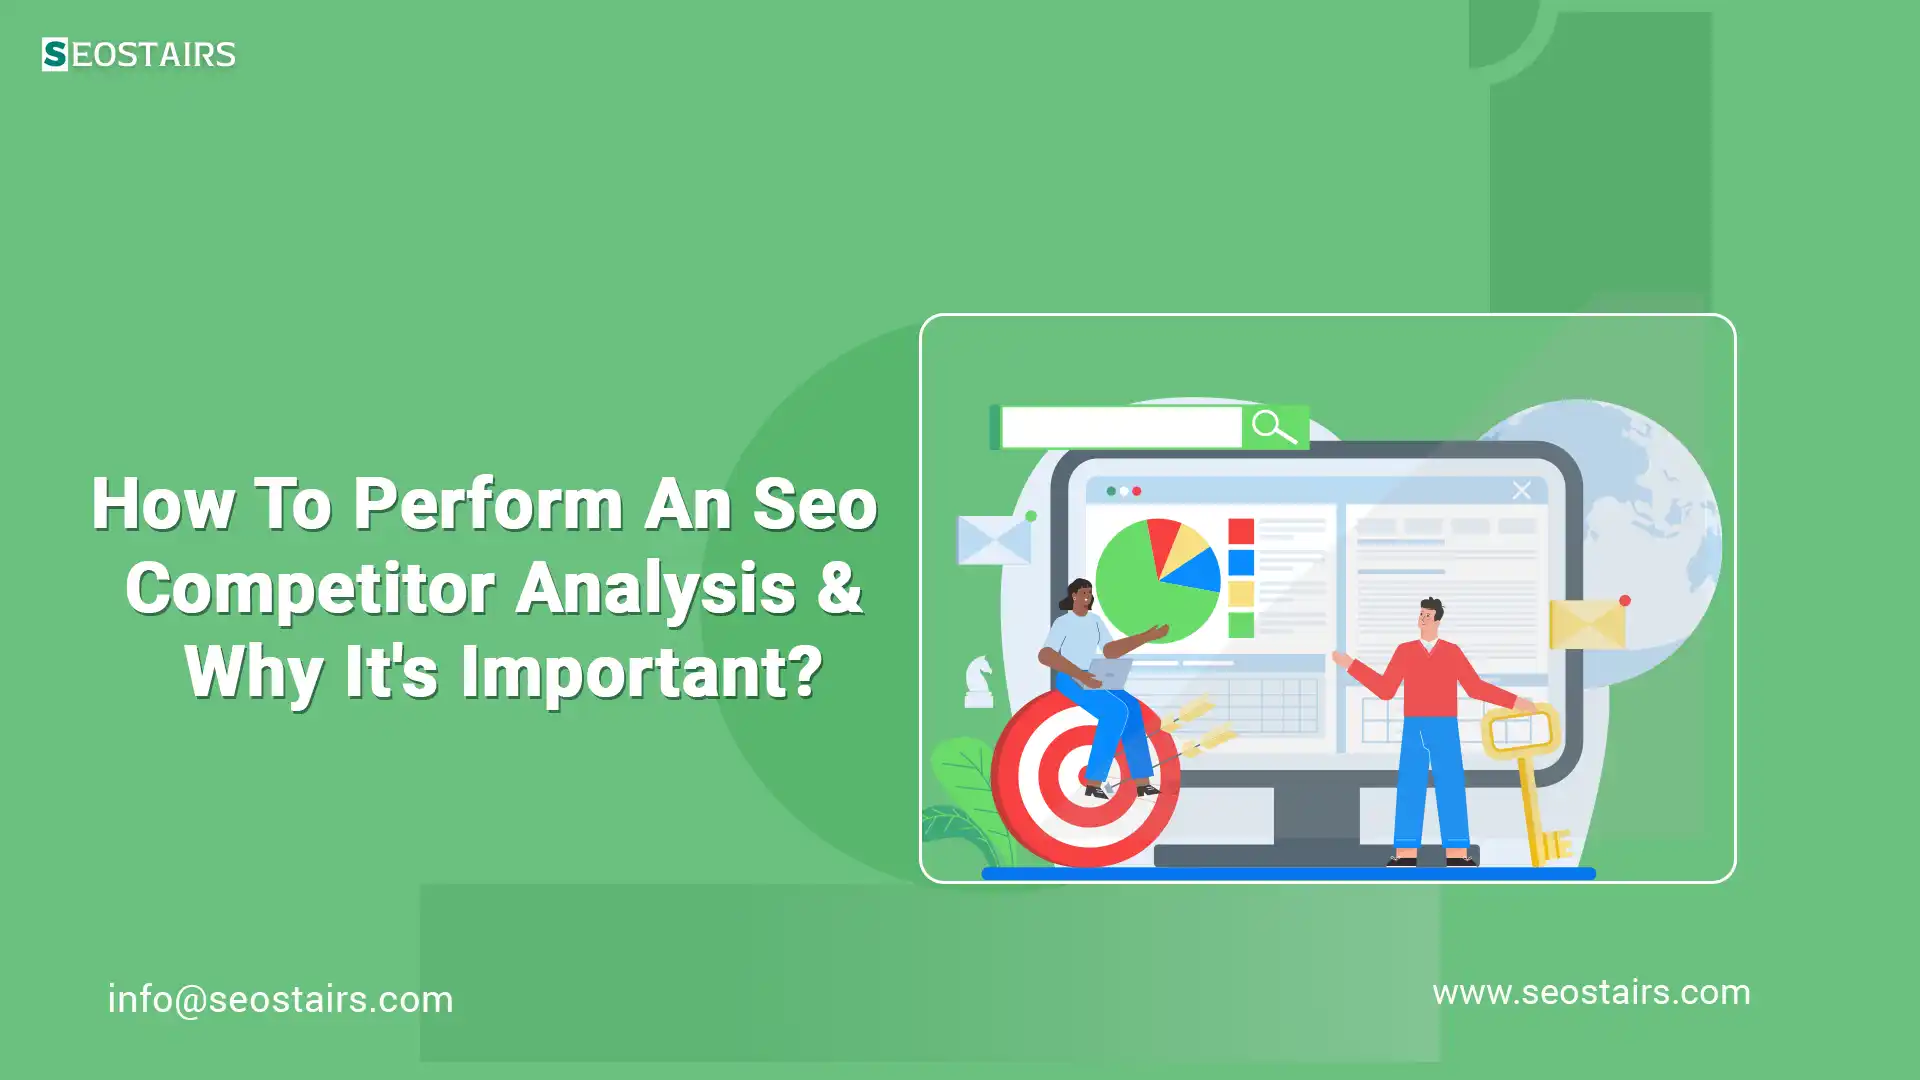 How to perform an SEO competitor analysis and why it’s important